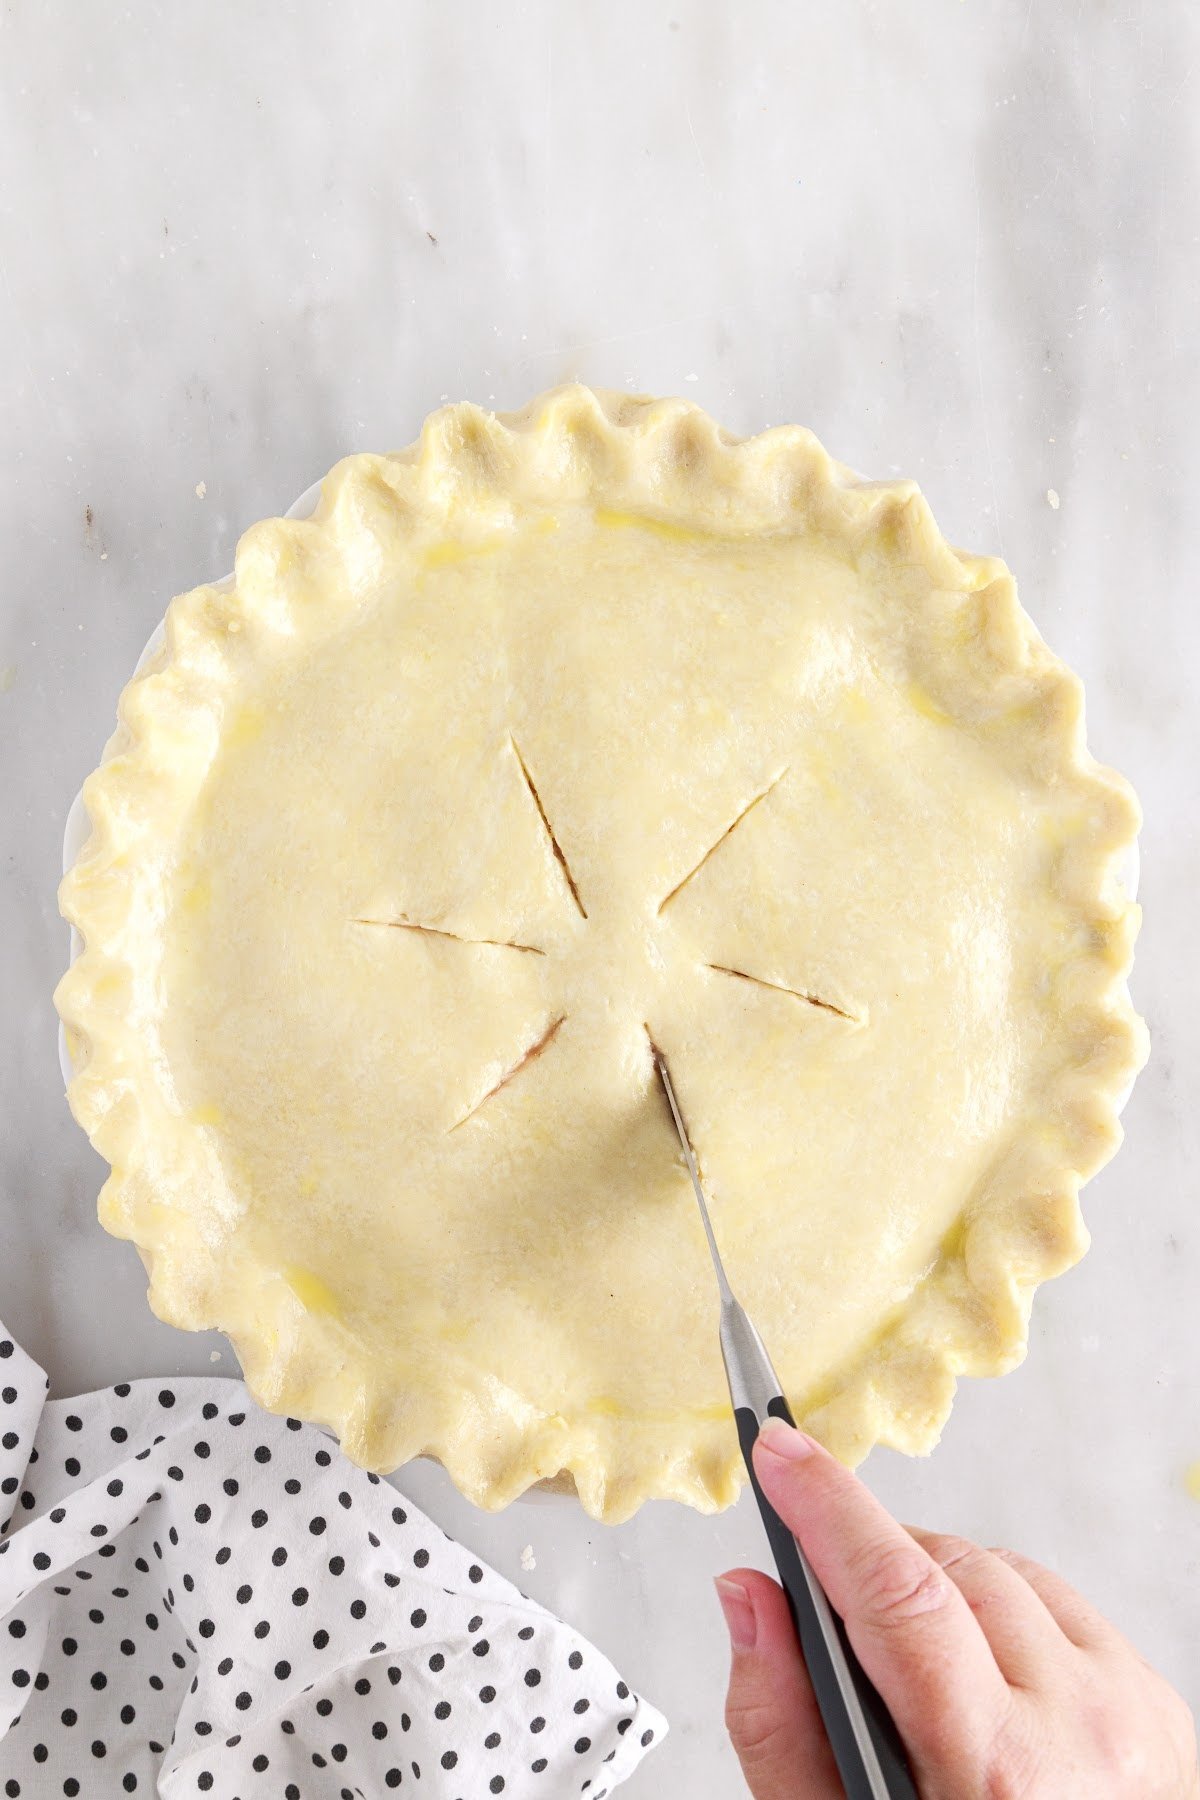 Cut slits on the top of the pie crust.